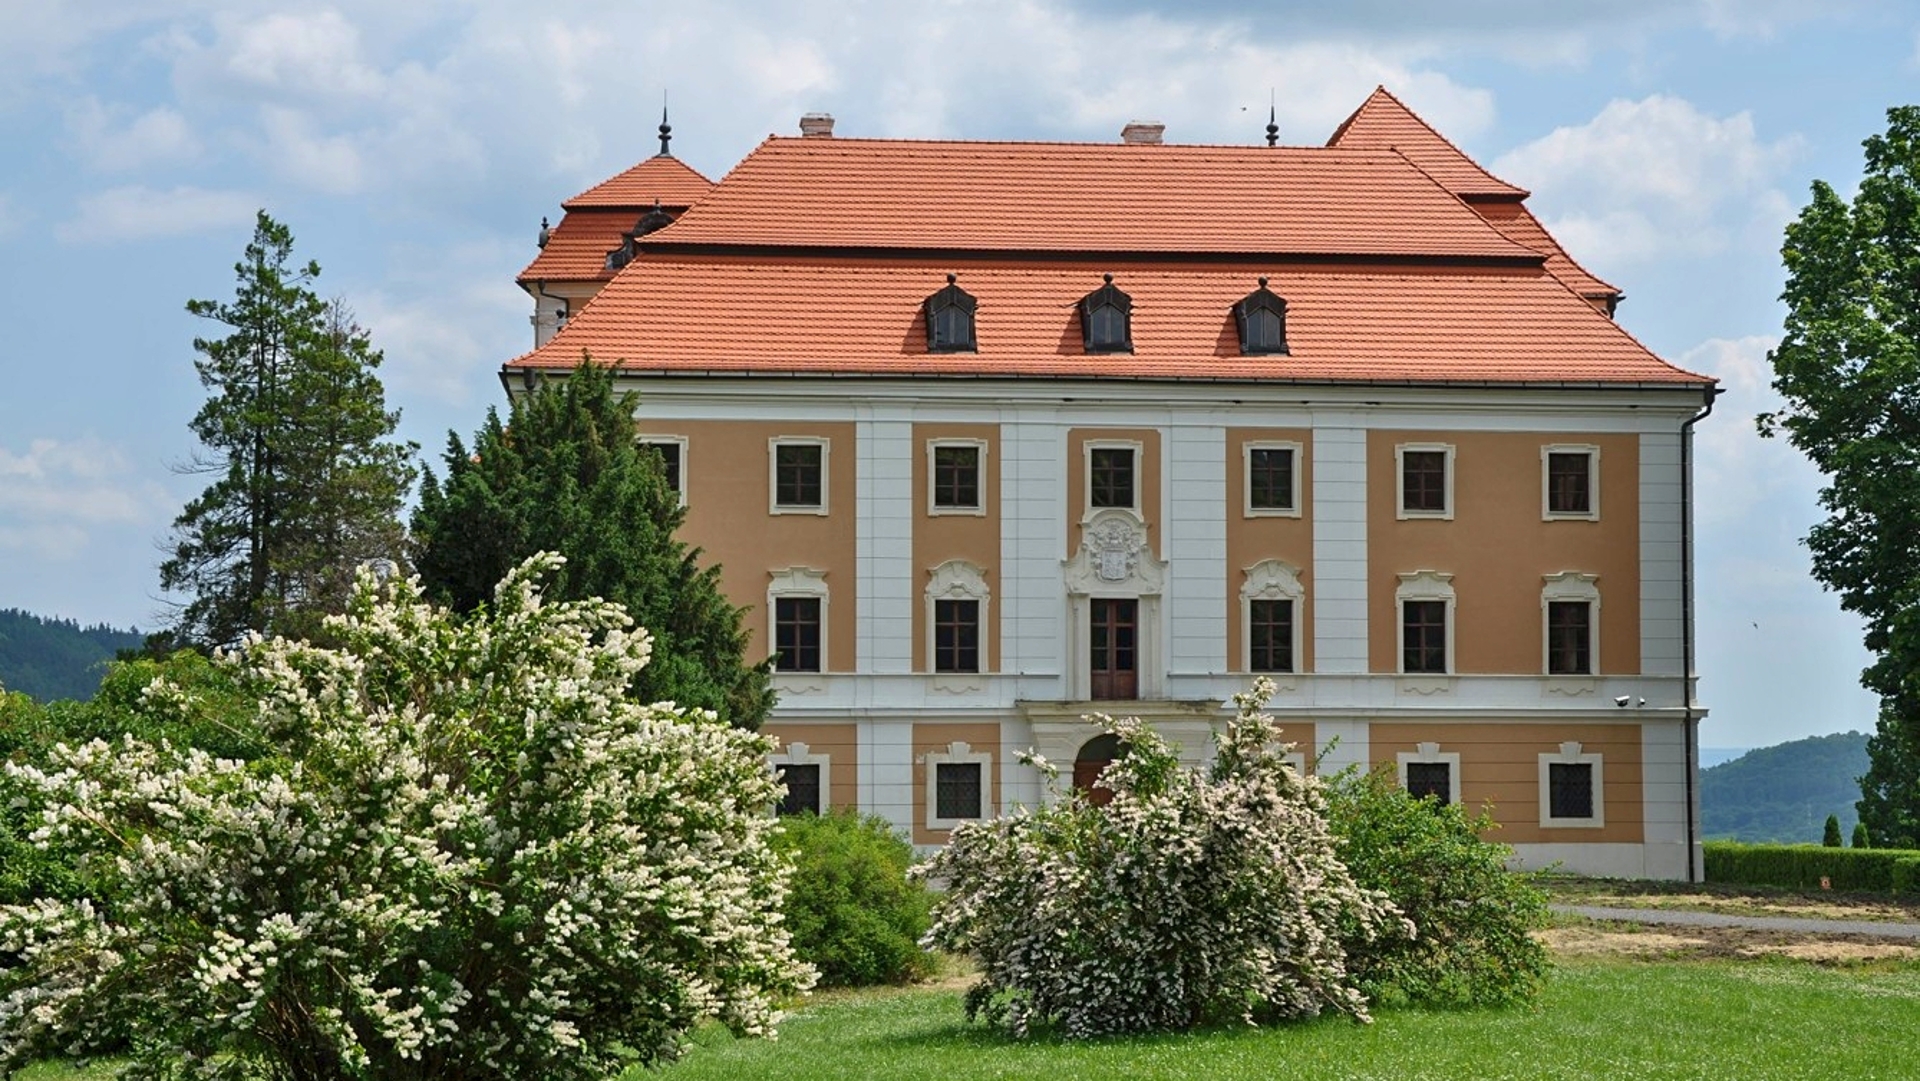 A photo of the Valec Chateau.